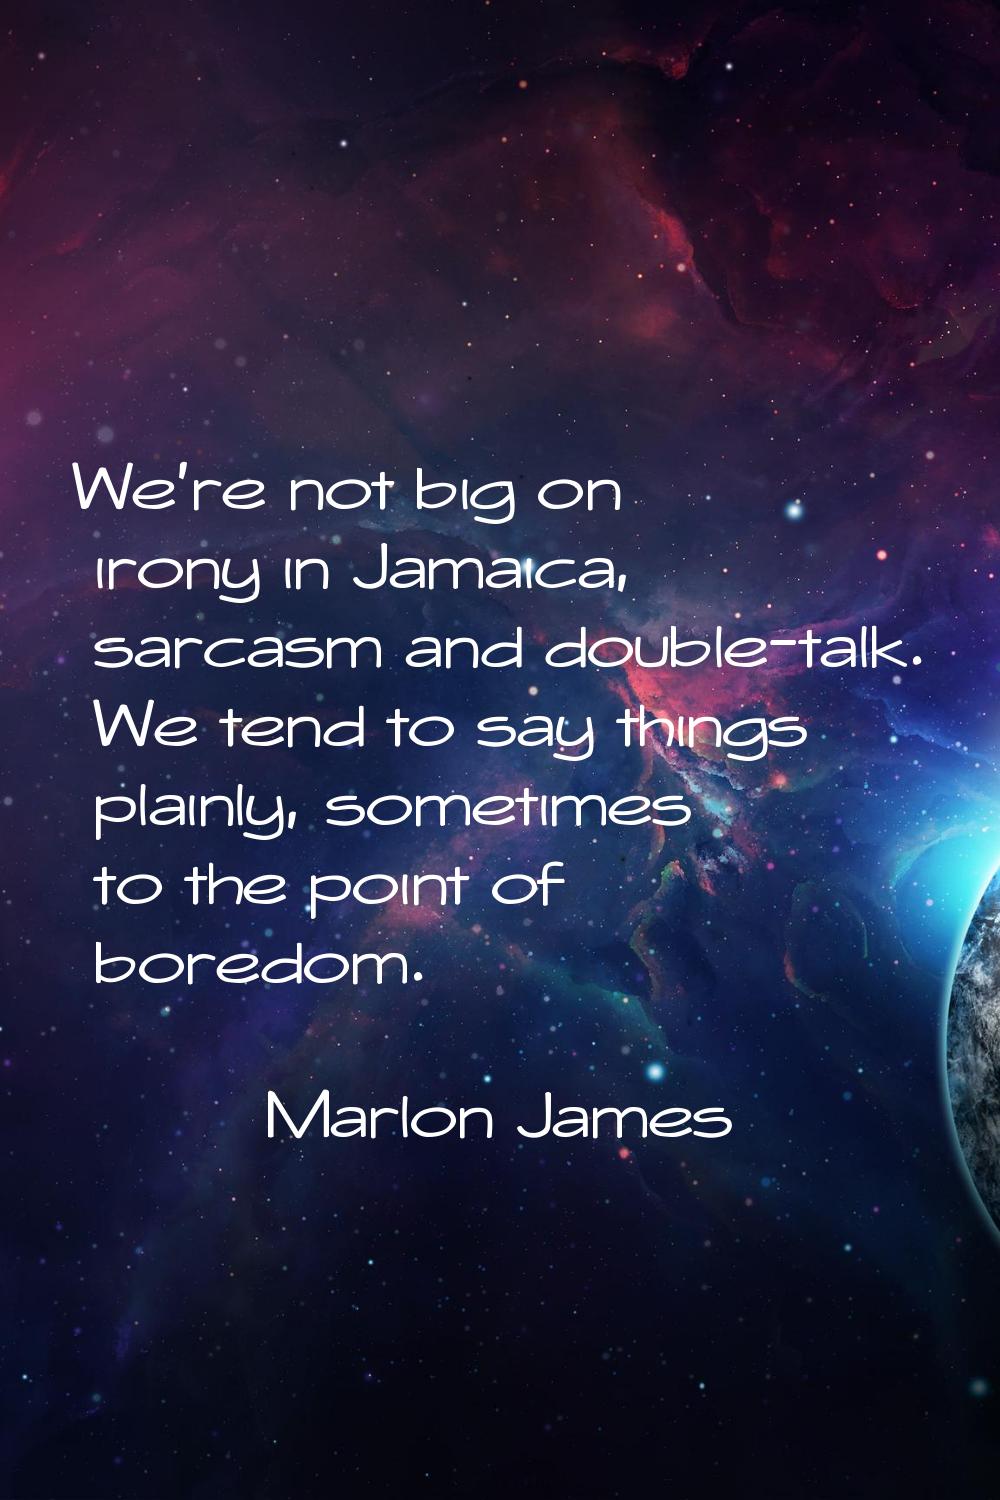 We're not big on irony in Jamaica, sarcasm and double-talk. We tend to say things plainly, sometime